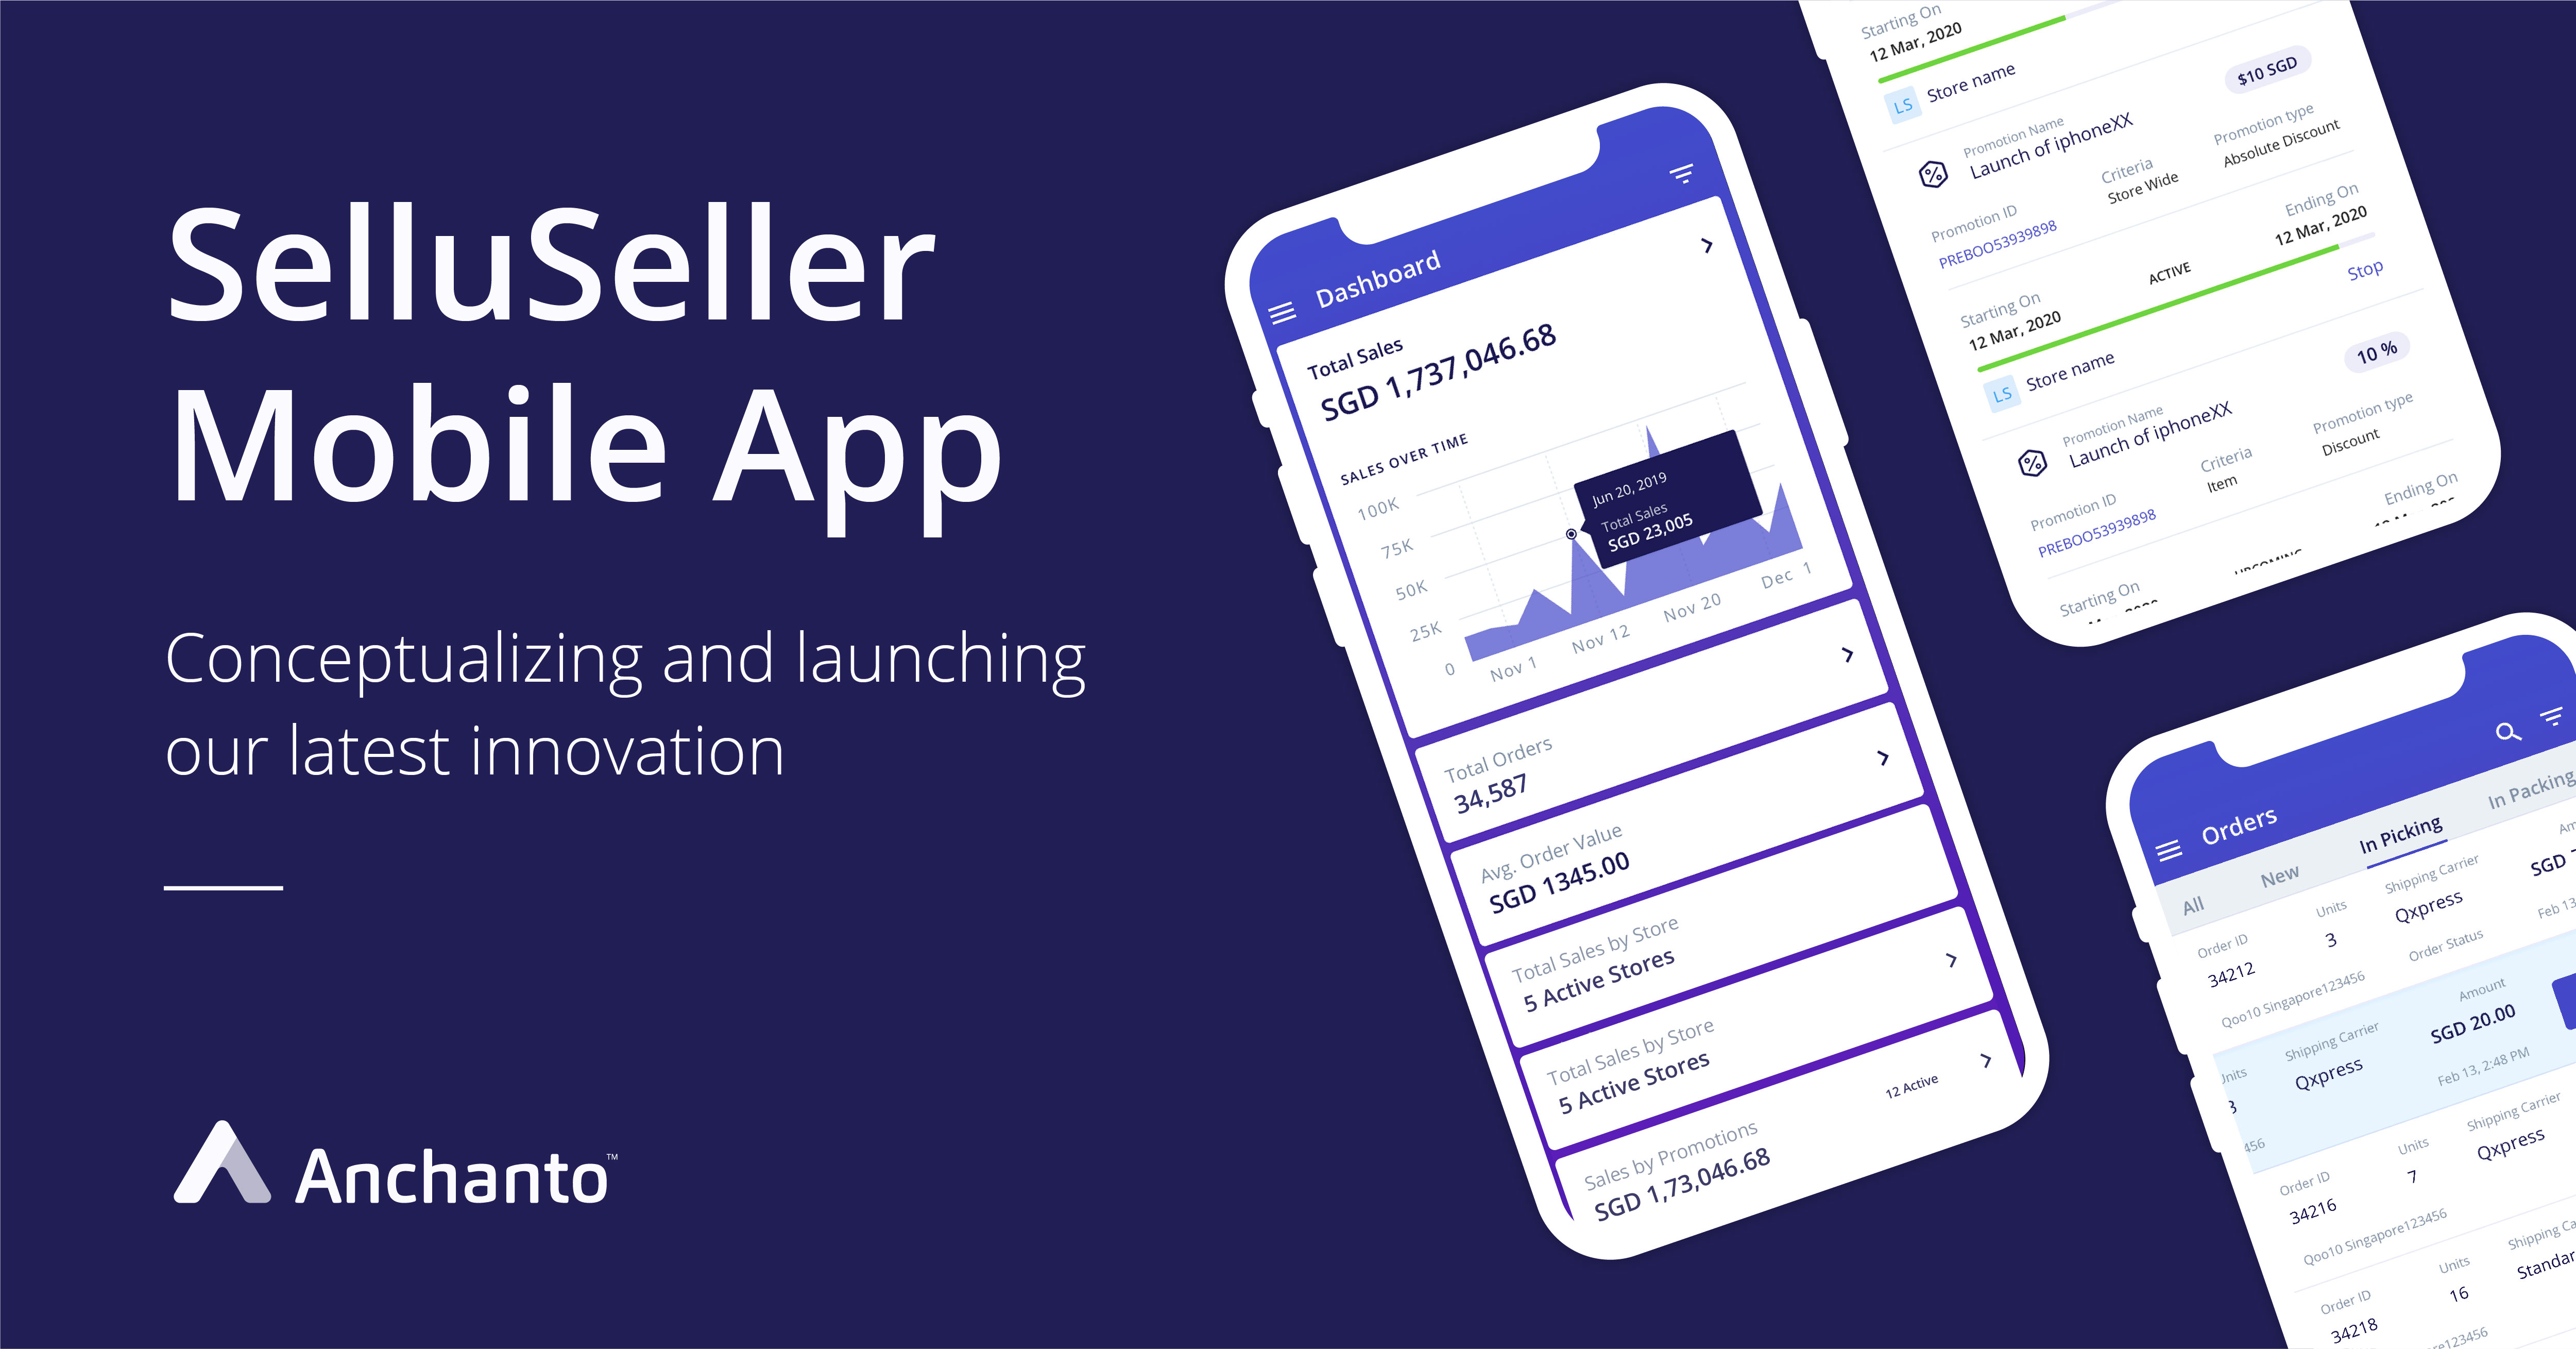 Anchanto’s revolutionary and innovative SelluSeller mobile application